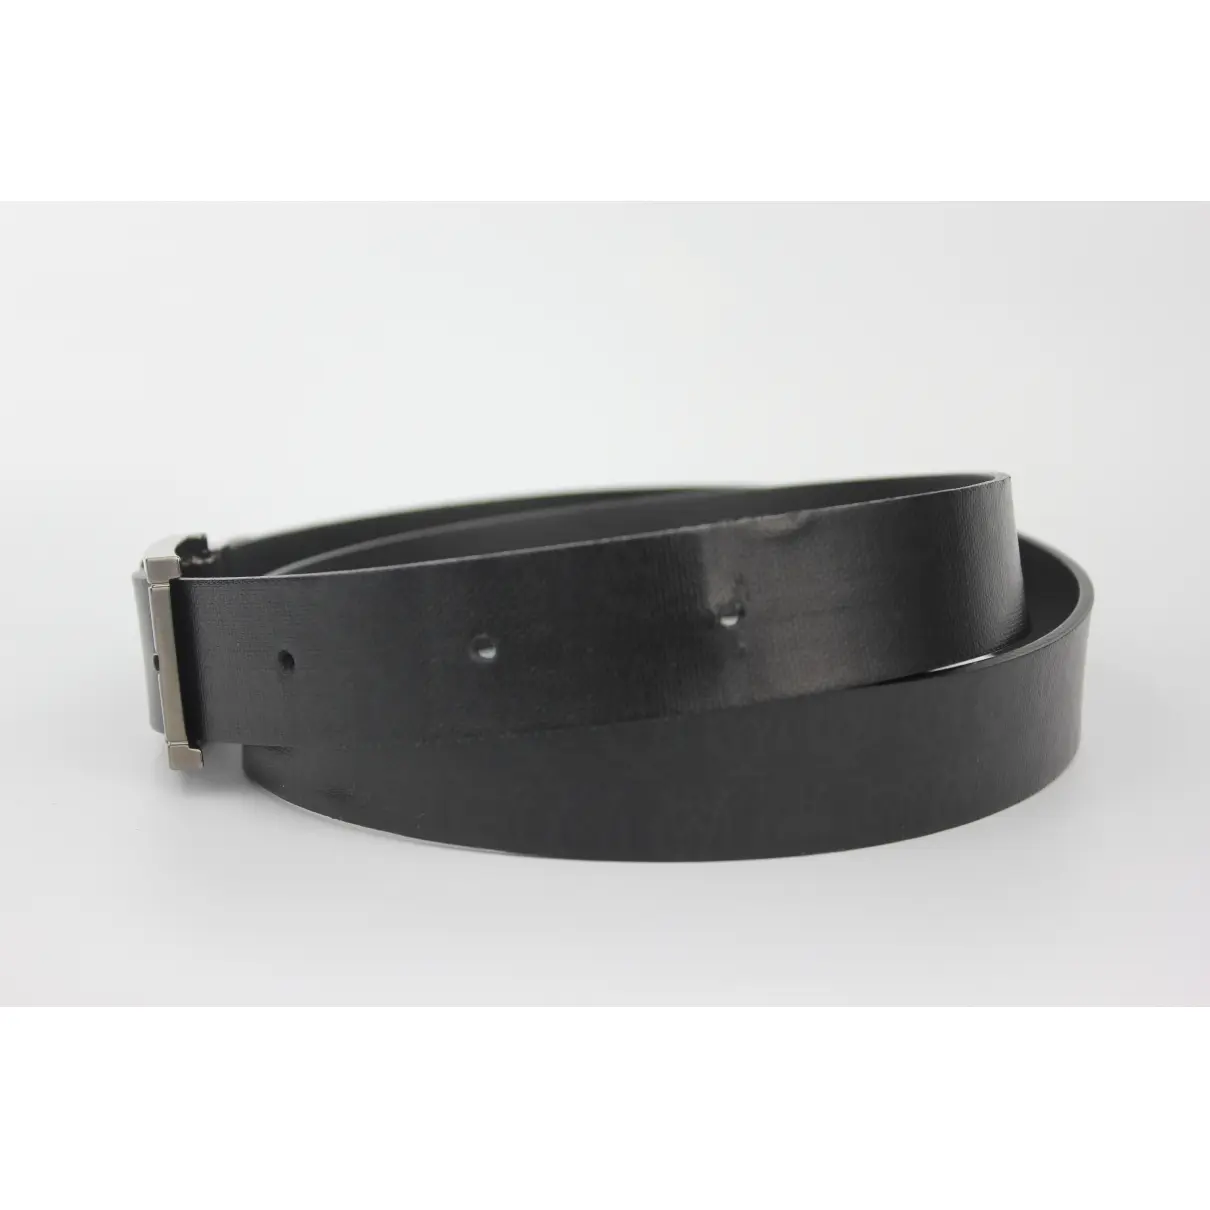 Luxury Alfred Dunhill Belts Men